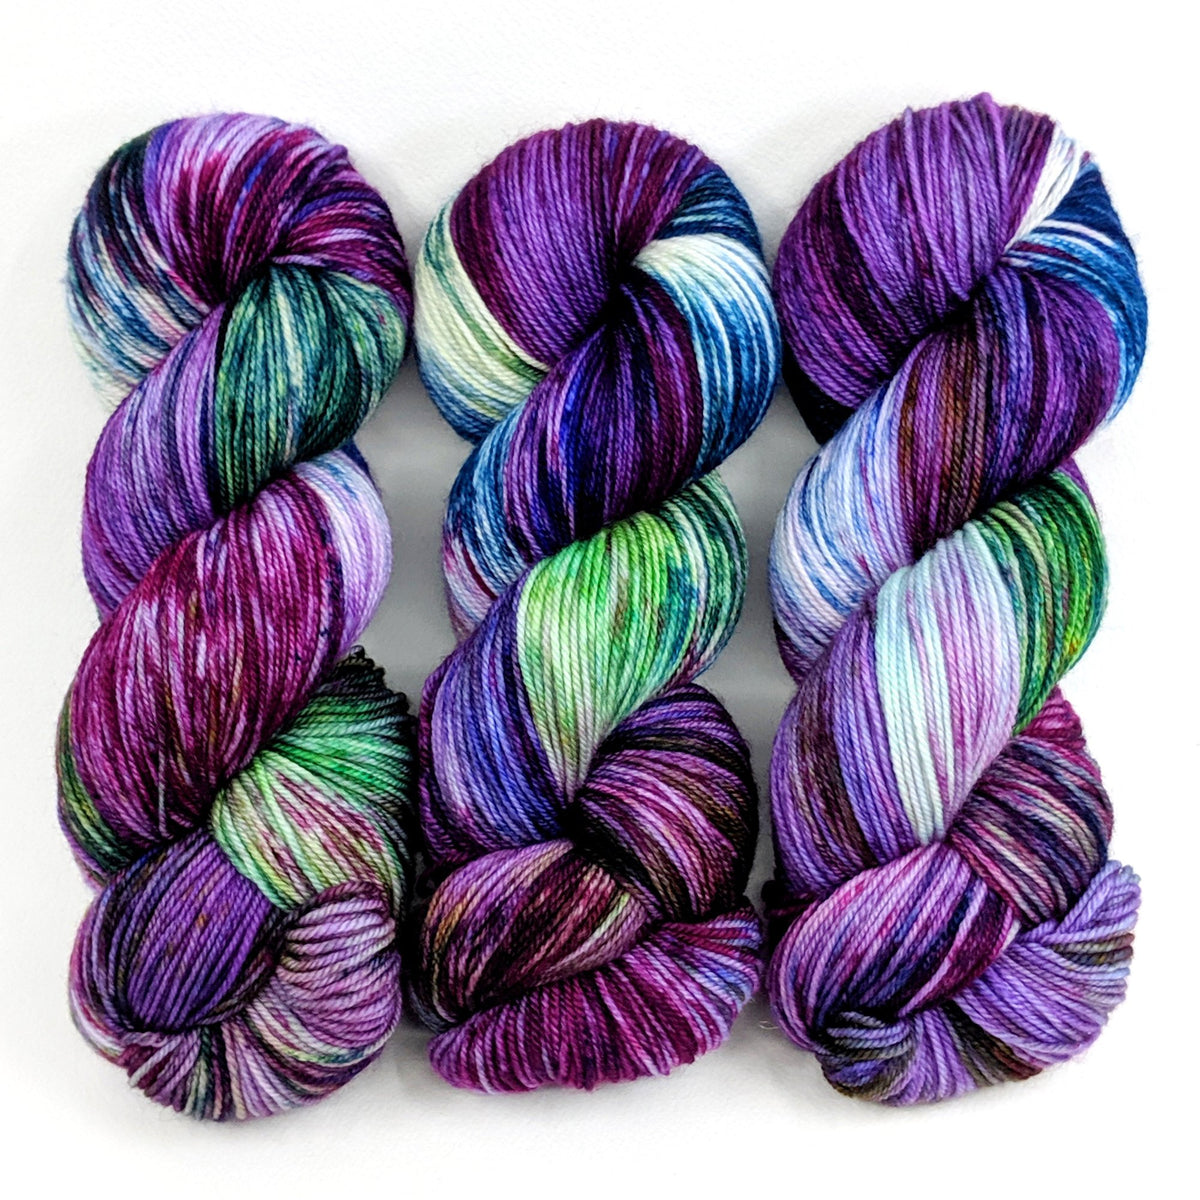 Beguilement - Passion 8 Fingering - Dyed Stock